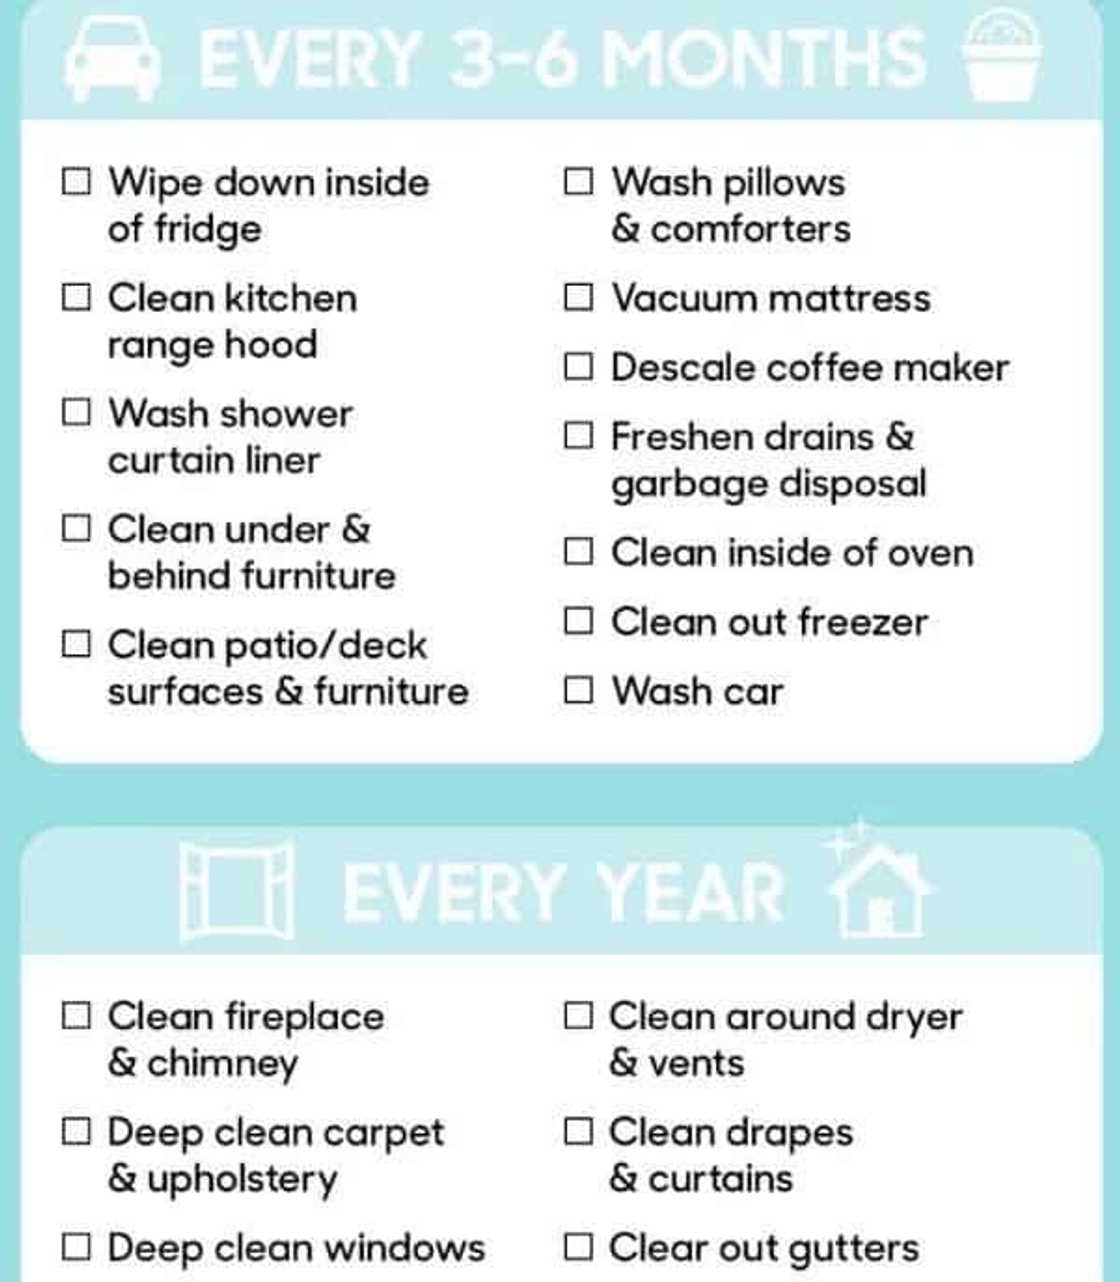 House cleaning schedule - The checklist you need